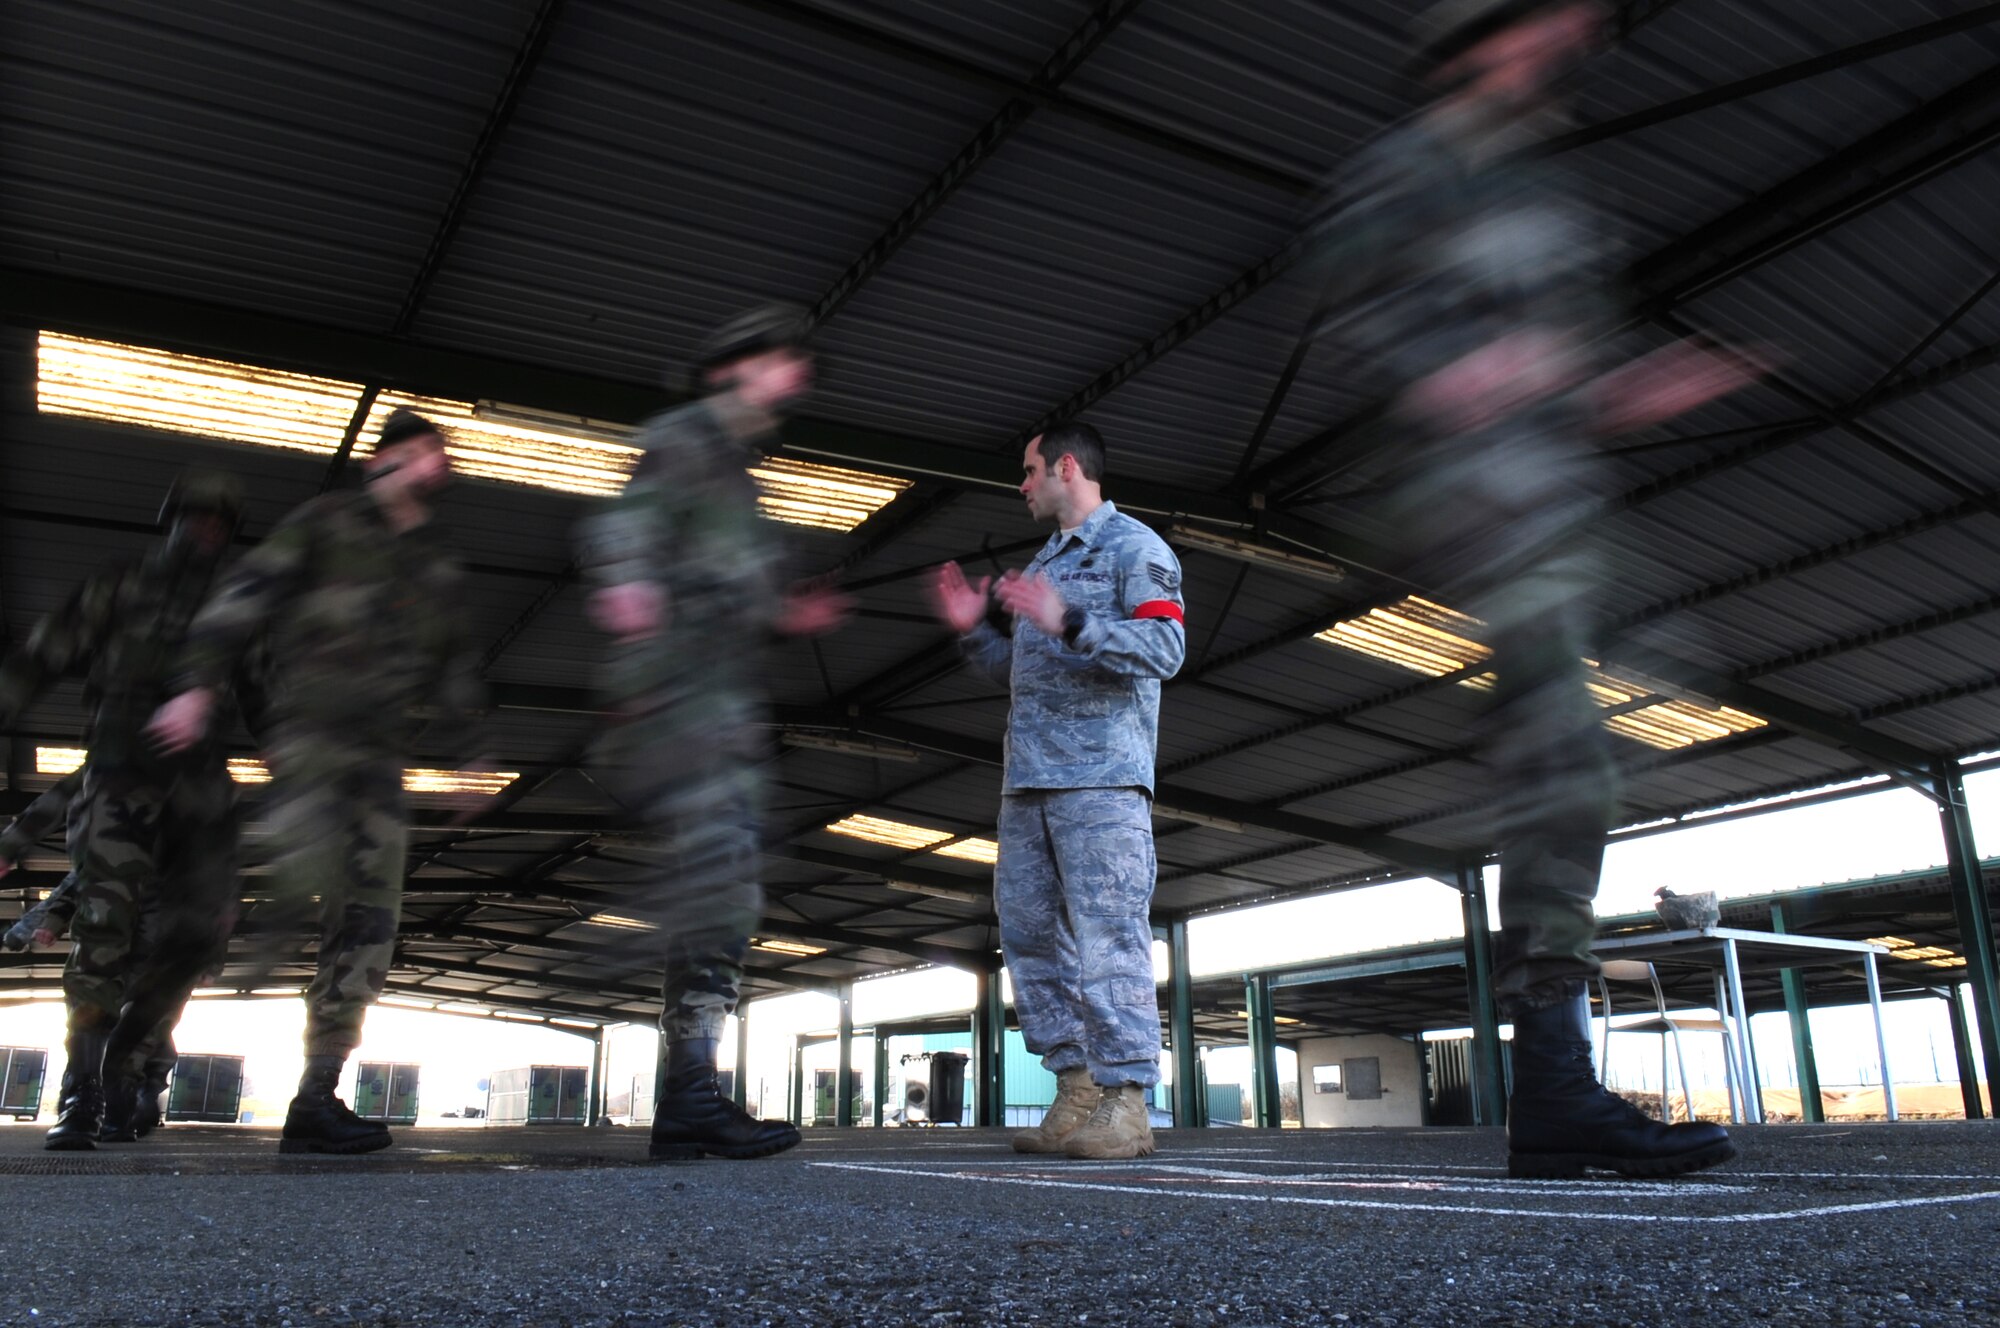 U.S. Air Force Staff Sgt. Joseph Klimaski from the 435th Security Forces Squadron goes through proper exiting procedures with members of the French military in preparation for a jump from a U.S. aircraft using U.S. equipment, March 2, 2010.  Members of the 435th Contingency Response Group and the 5th Quartermaster Company joined with their French military counterparts for a week of training at the École des troupes aéroportées (ETAP), or School of Airborne Troops, a military school dedicated to training the military paratroopers   of the French army, located in the town of Pau, in the département of Pyrénées-Atlantiques, France.  The ETAP is responsible for training paratroopers, and for international cooperation and promotion of paratroop culture. (U.S. Air Force Photo by Staff Sgt. Jocelyn Rich)